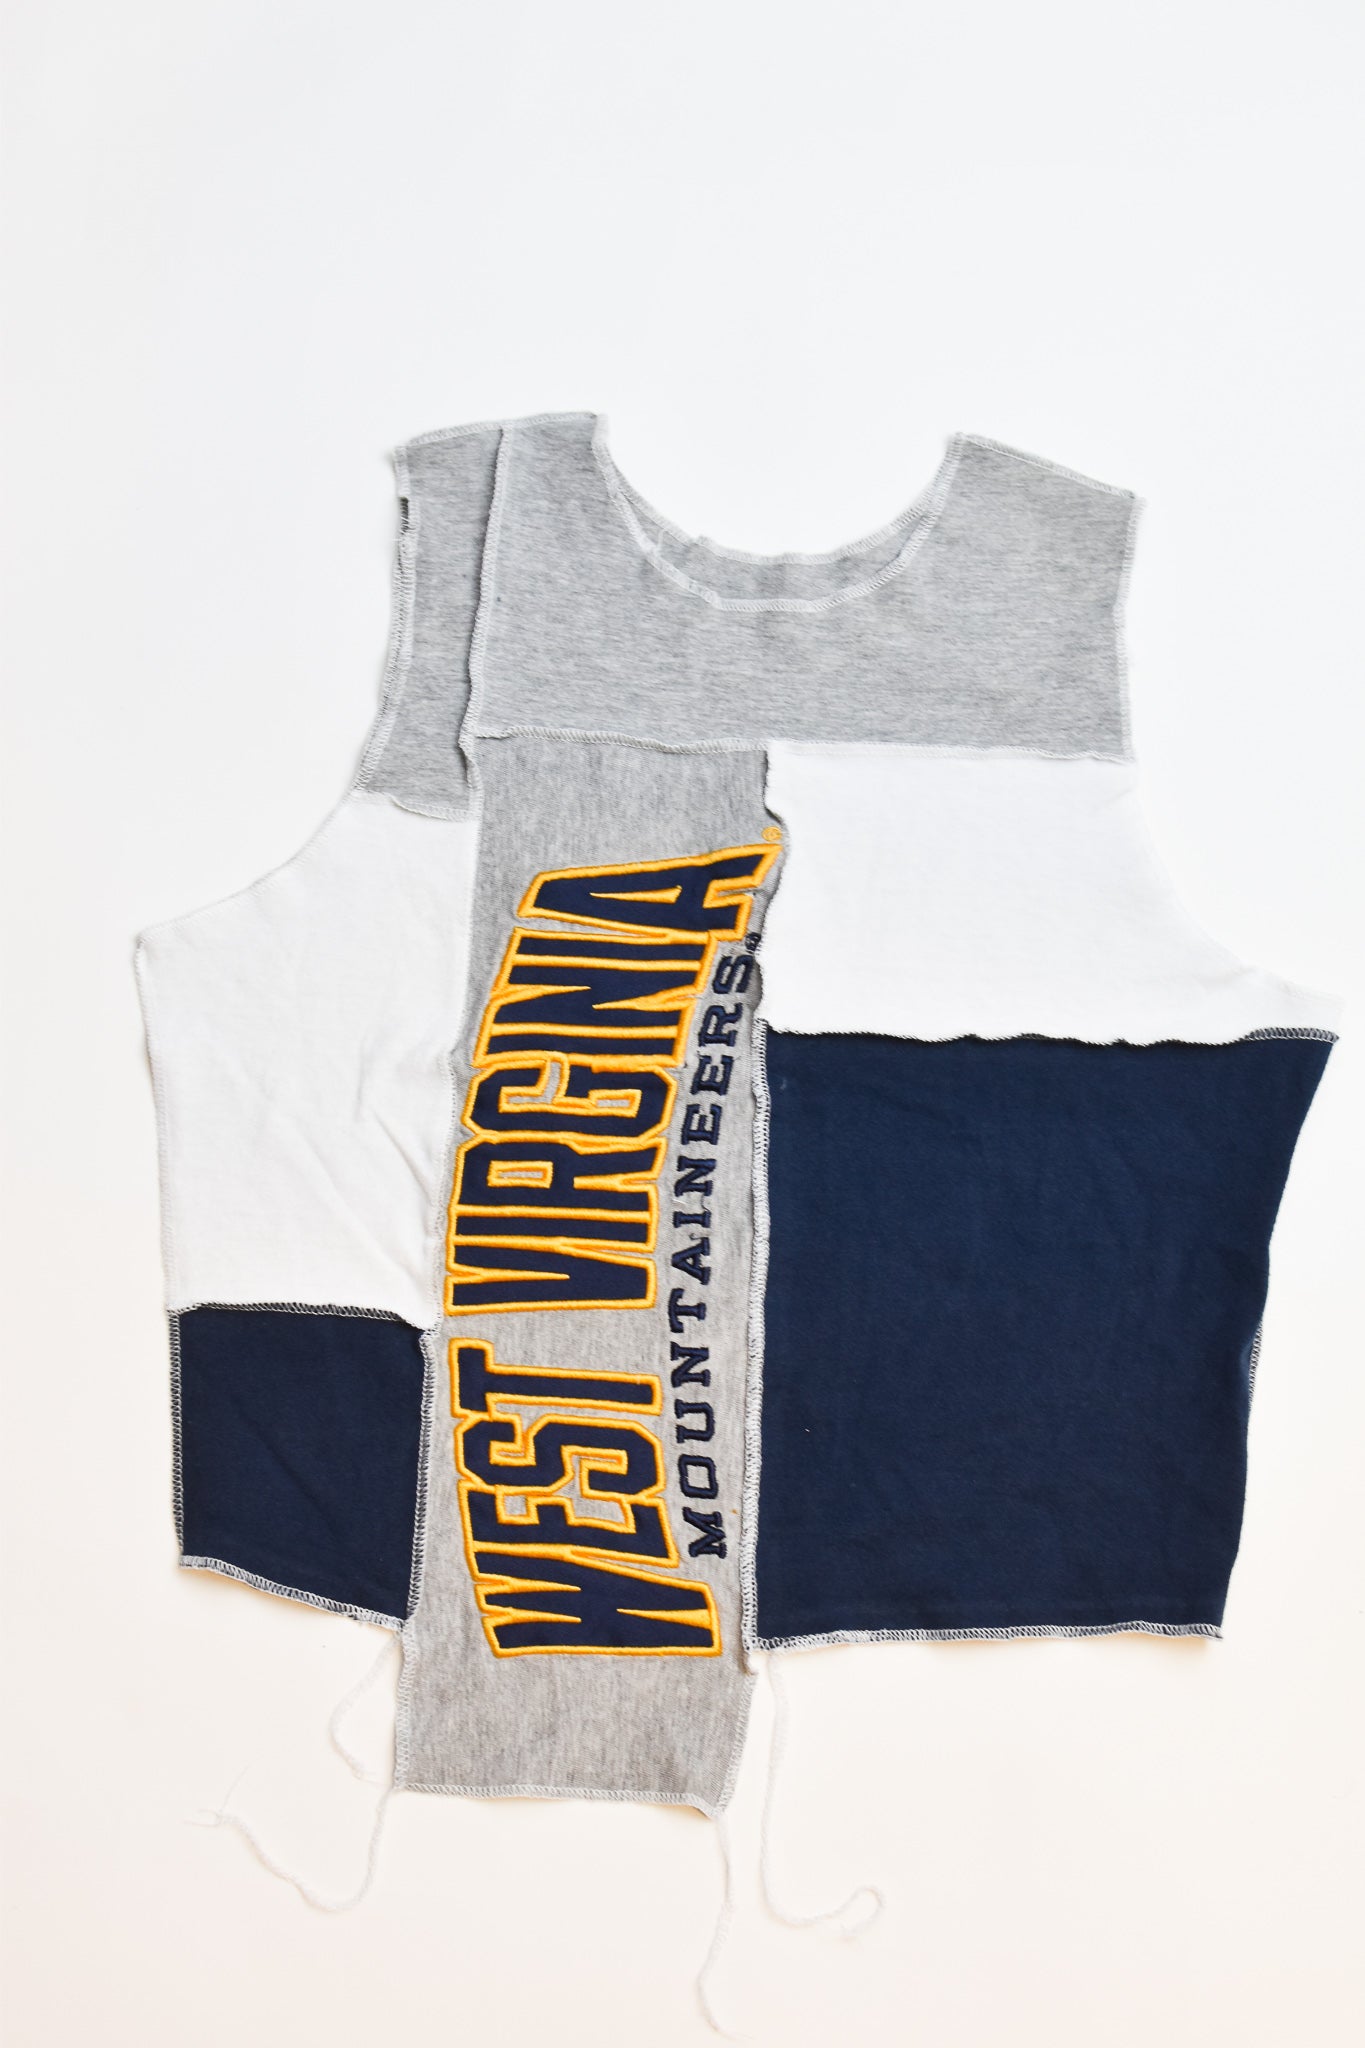 Upcycled West Virginia Scrappy Tank Top